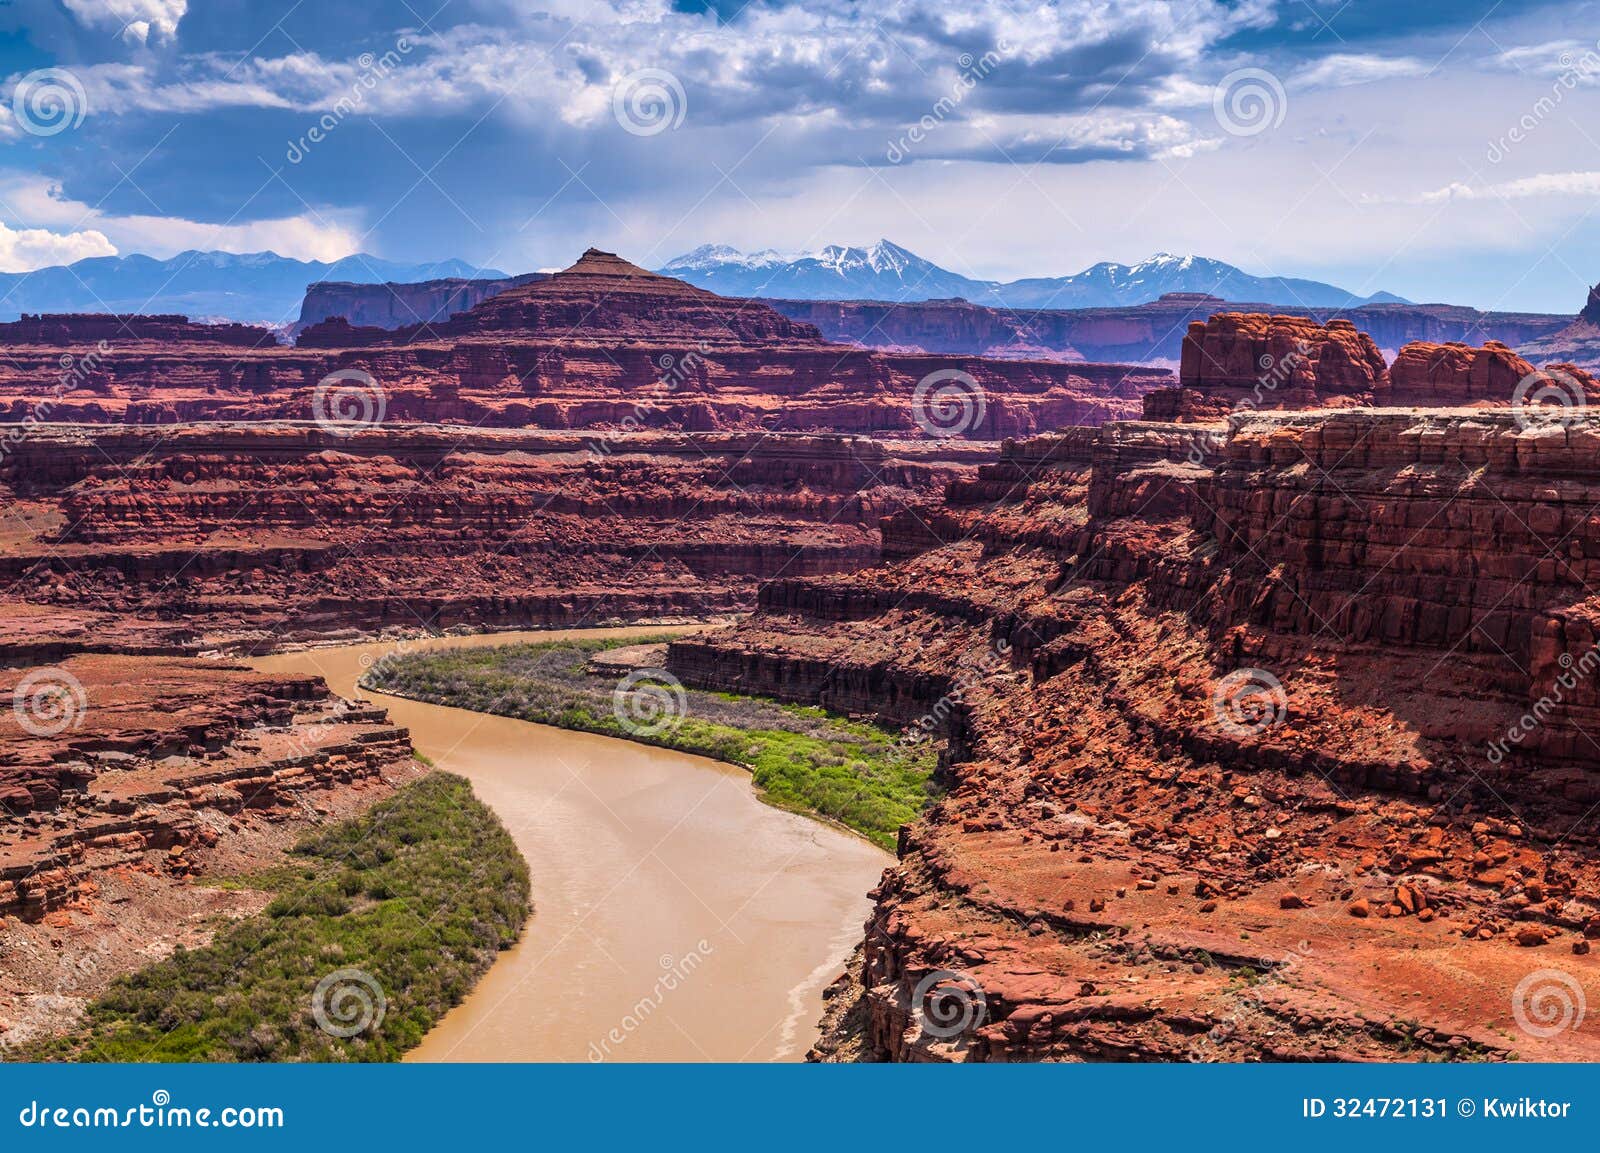 Thelma and Louise Also Known As Fossil Point. Stock Image - Image of point,  desert: 32472131